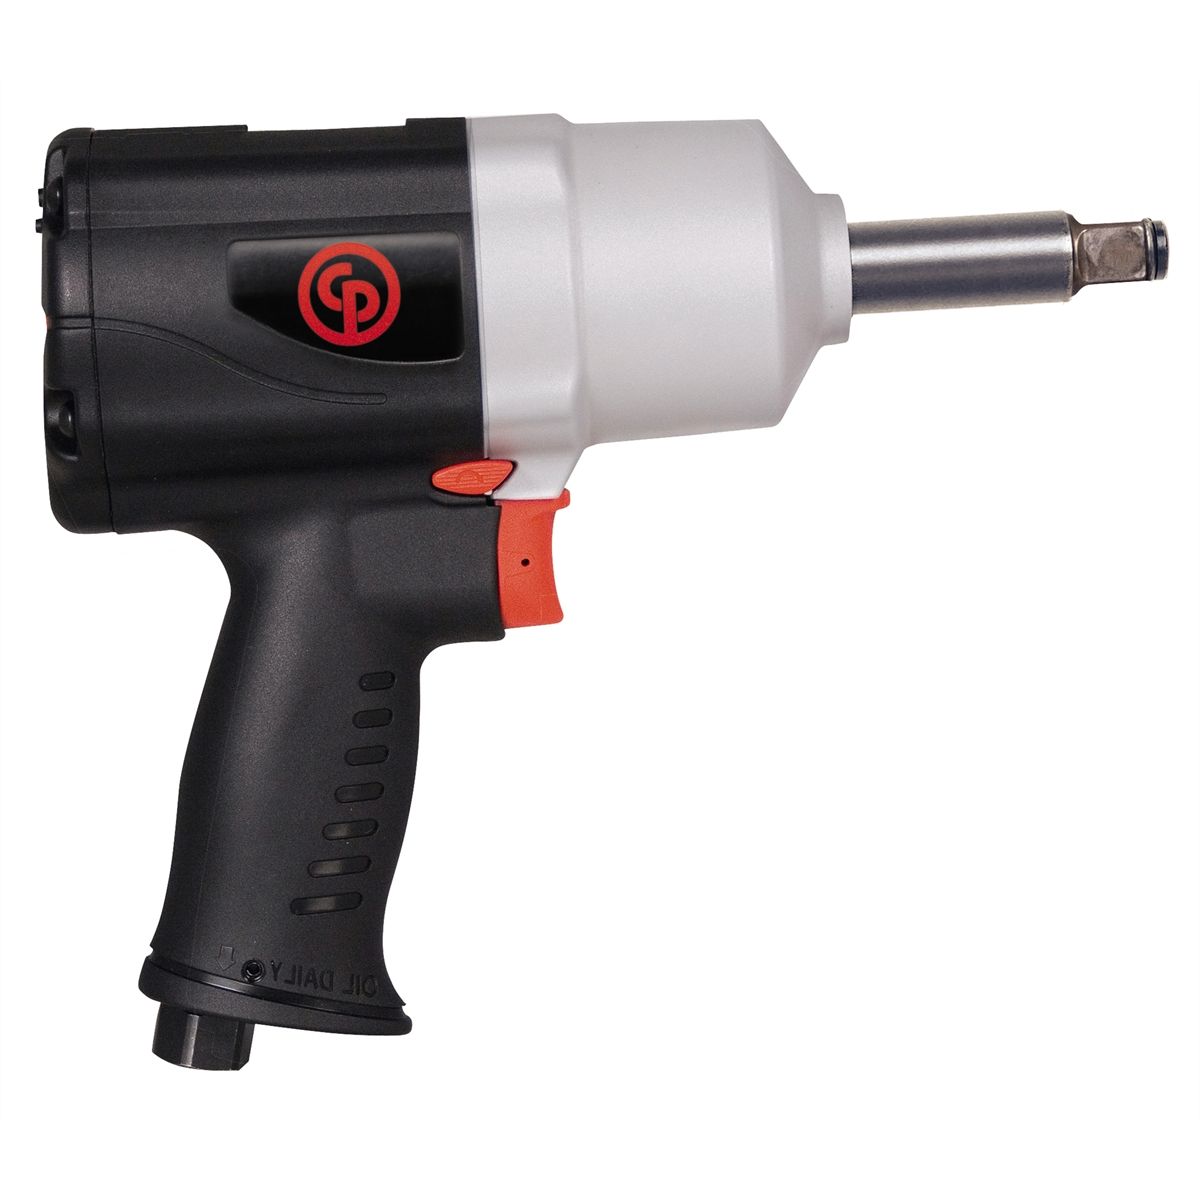 1/2 Inch Air Impact Wrench 725 Ft/Lbs | Chicago Pneumatic | 7749-2